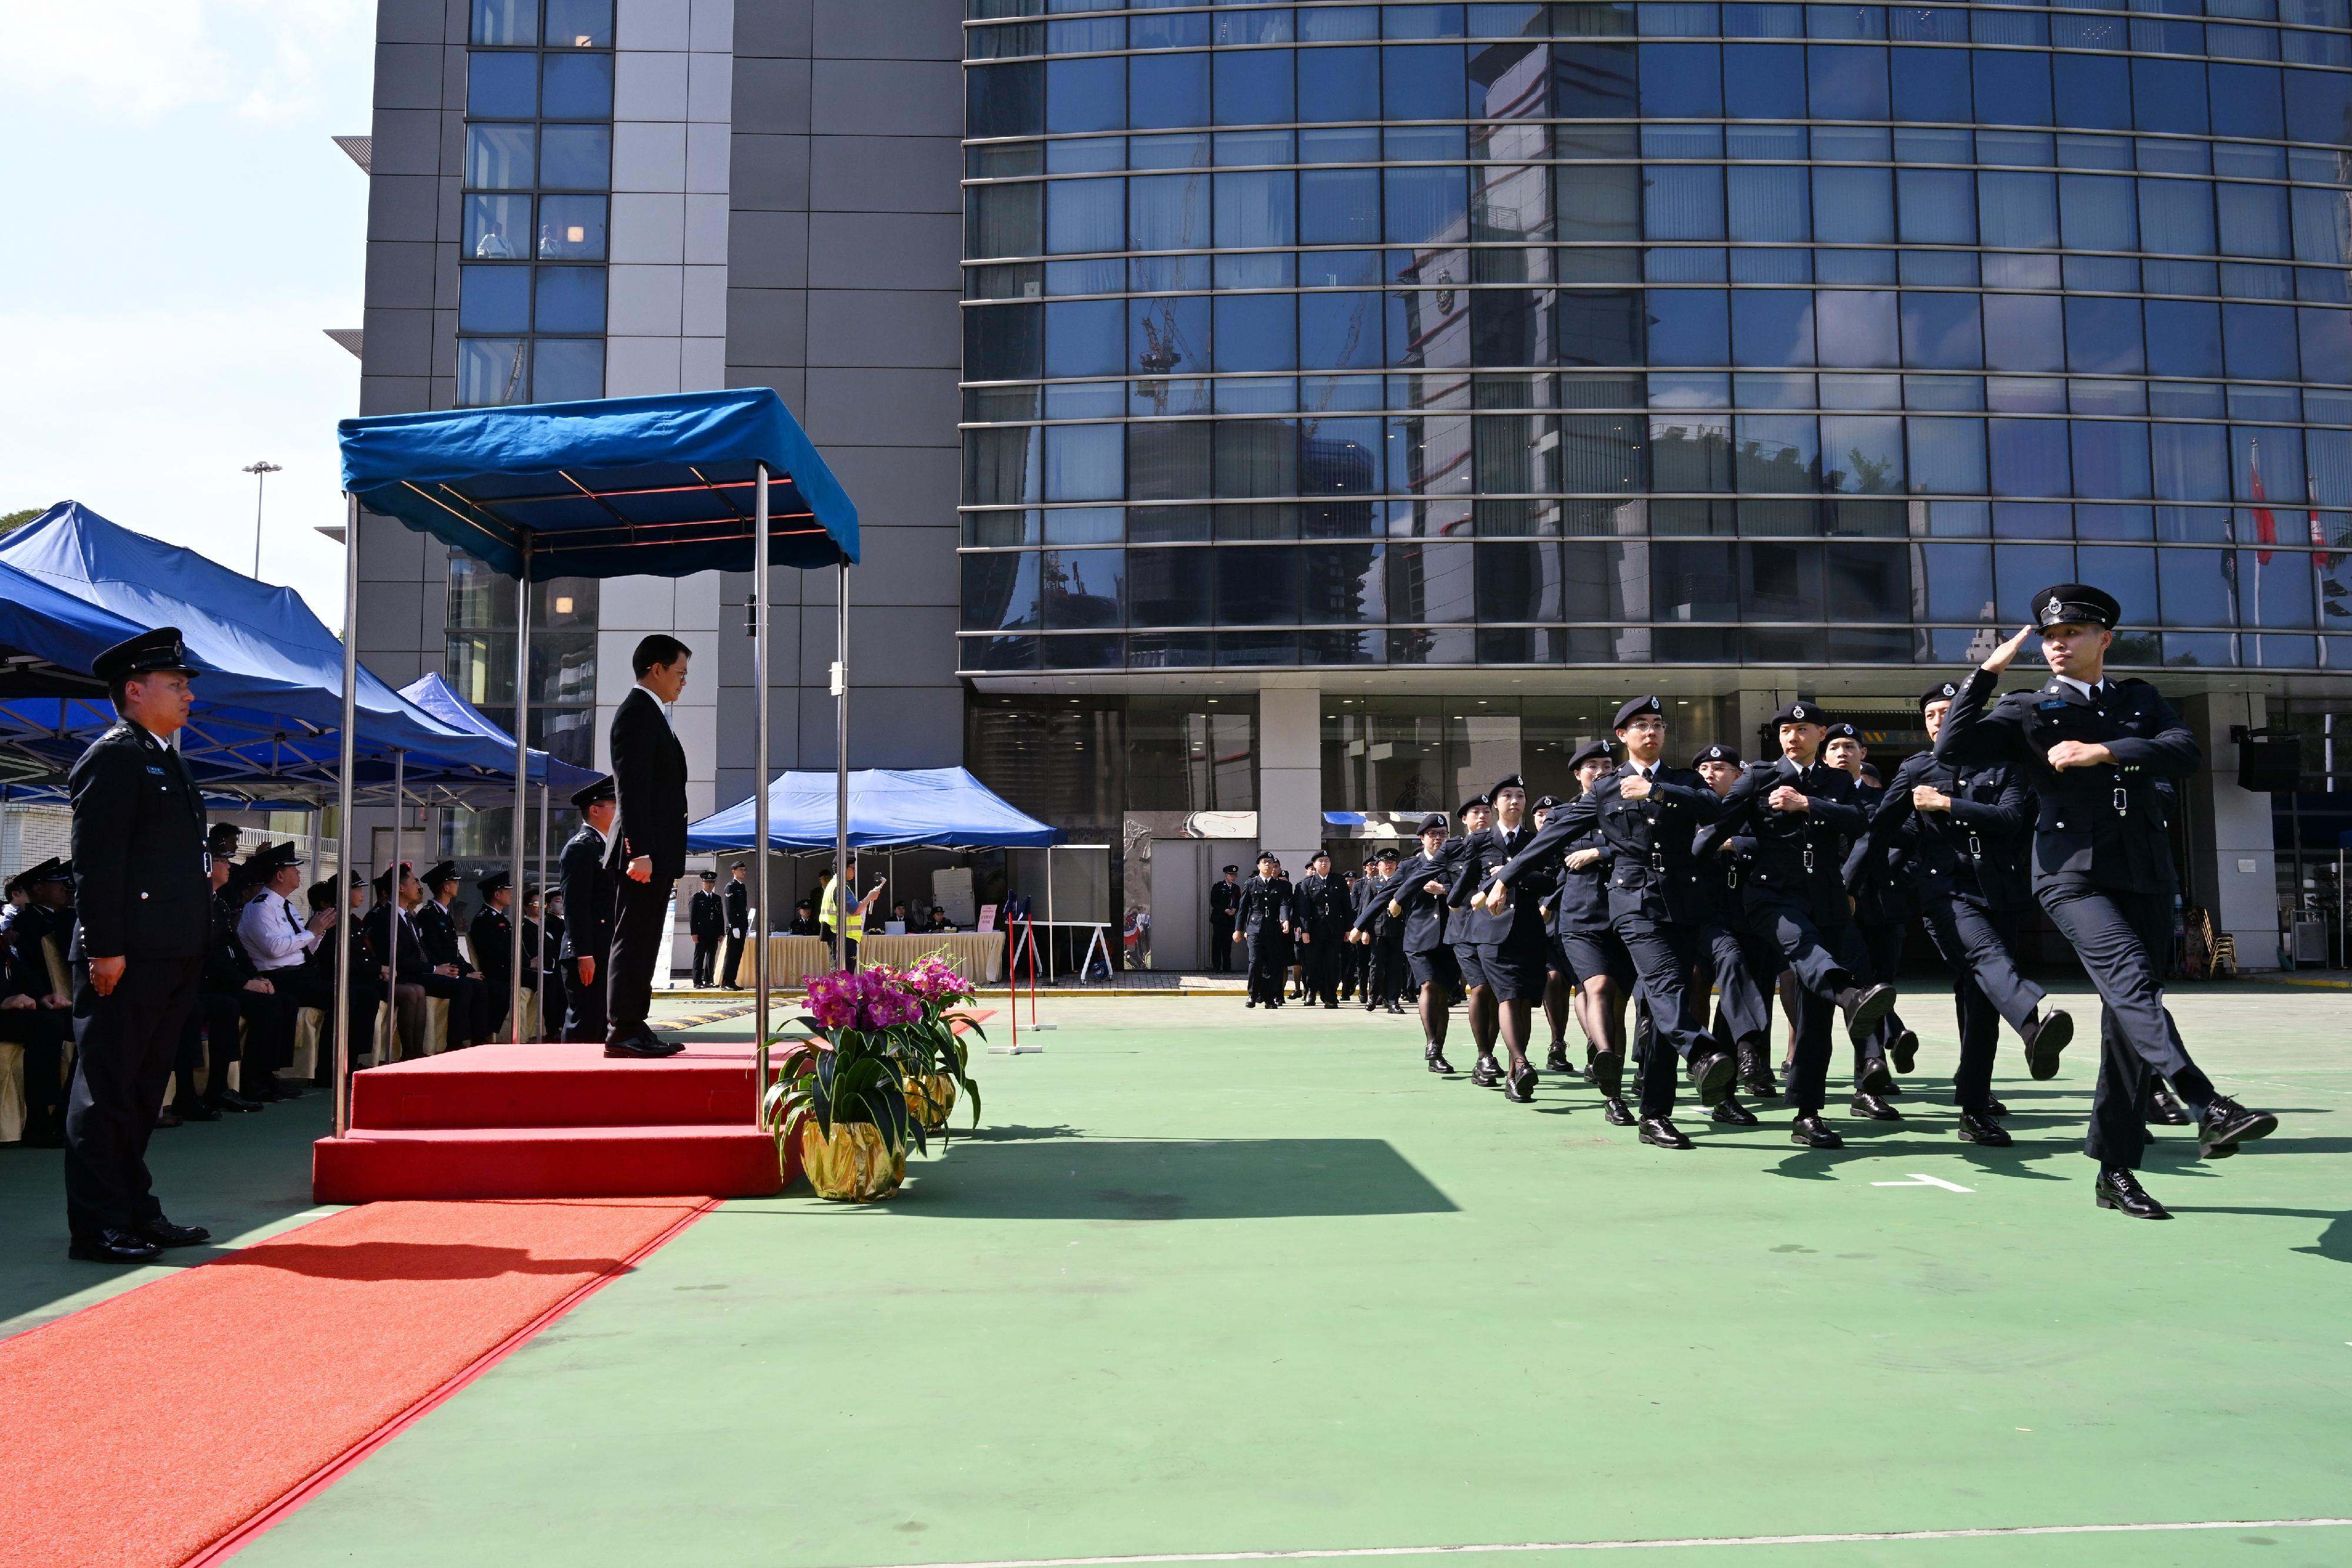 The Civil Aid Service held the 87th Recruits Passing-out Parade at its headquarters today (March 24). Photo shows the parade marching past the review stand.